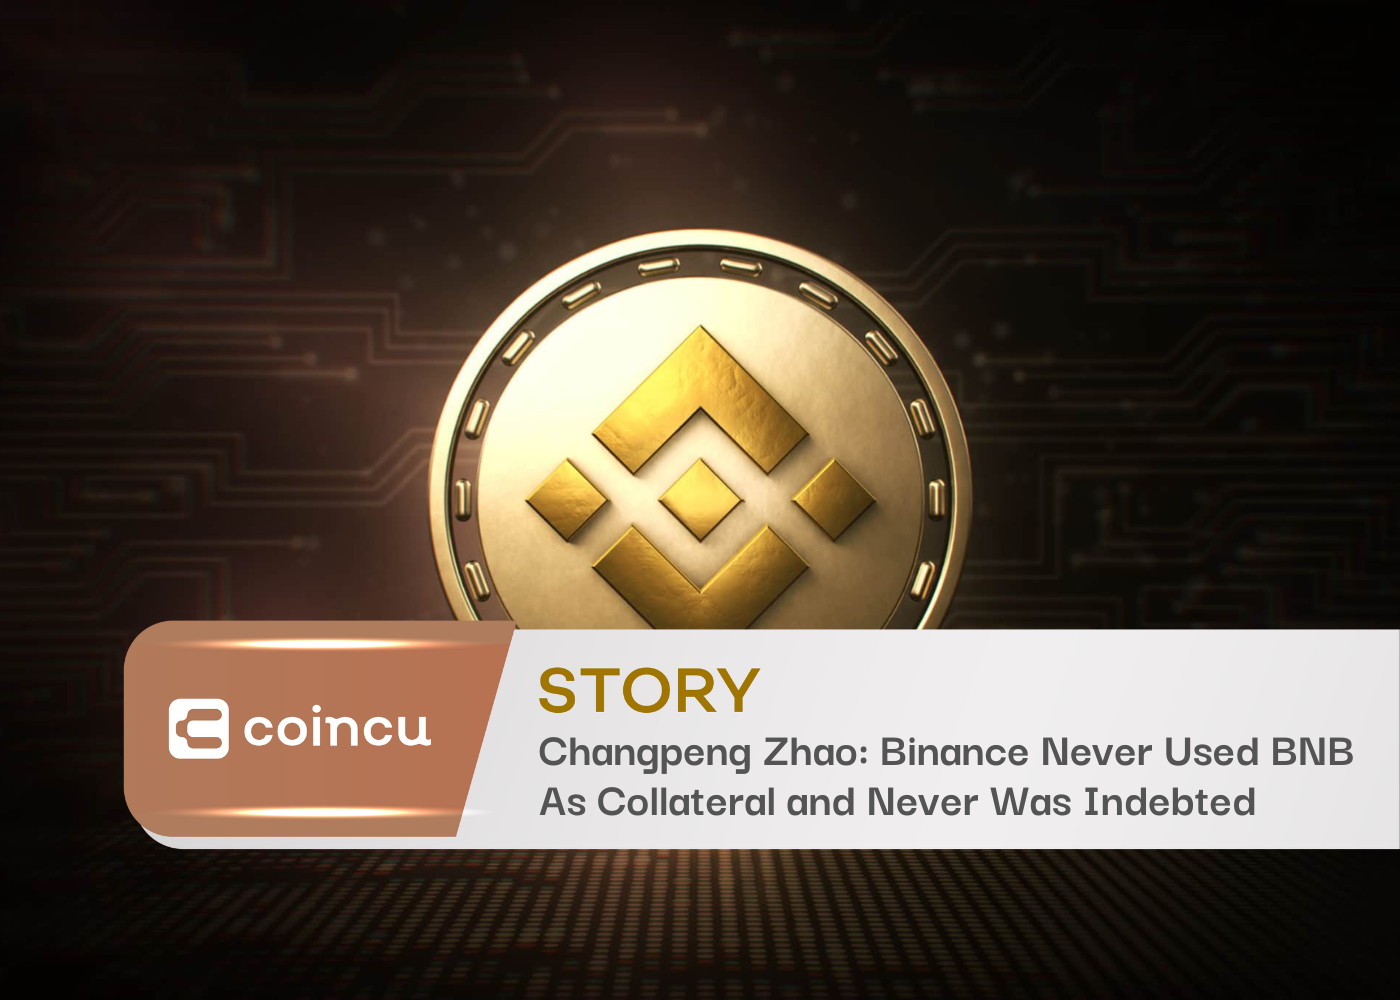 Changpeng Zhao: Binance Never Used BNB As Collateral and Never Was Indebted